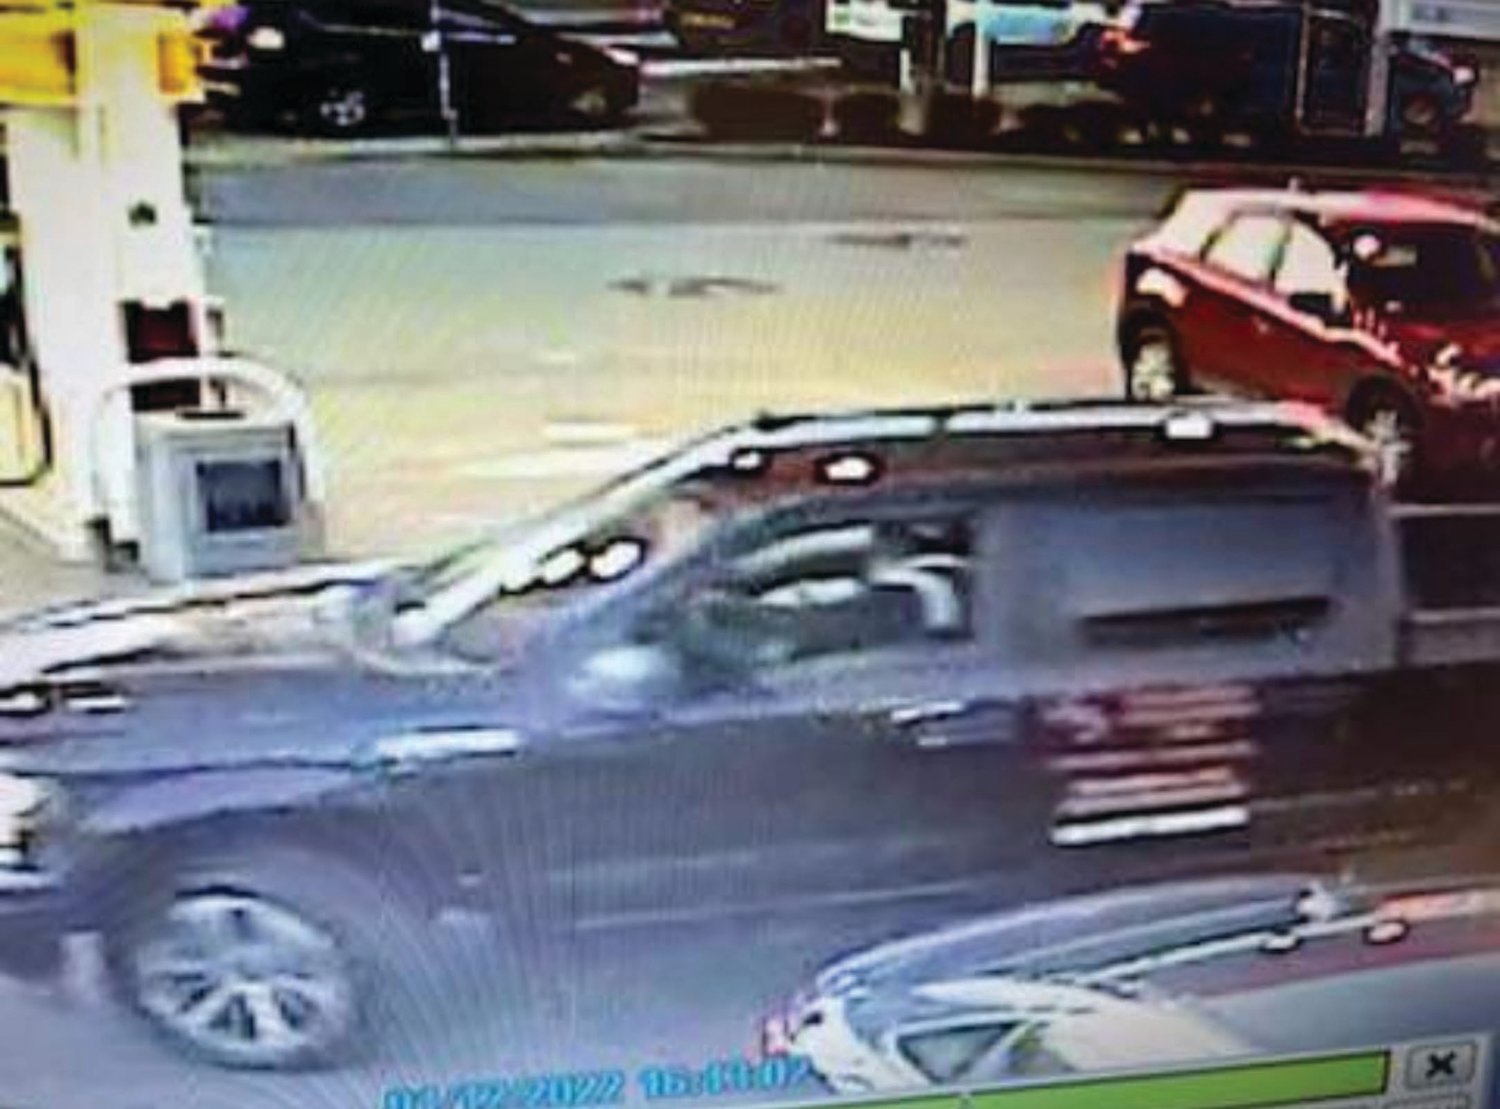 “Through the course of their investigation, it was determined that the man pictured above struck another vehicle and then left the scene without identifying himself,” police said. “He was driving a black Ford F-150 truck with orange lettering on the side.”

Anyone with information that could lead to identifying the suspect is asked to contact Johnston Police Lt. Michael Babbitt at the Johnston Police Department, 401-757-3144.